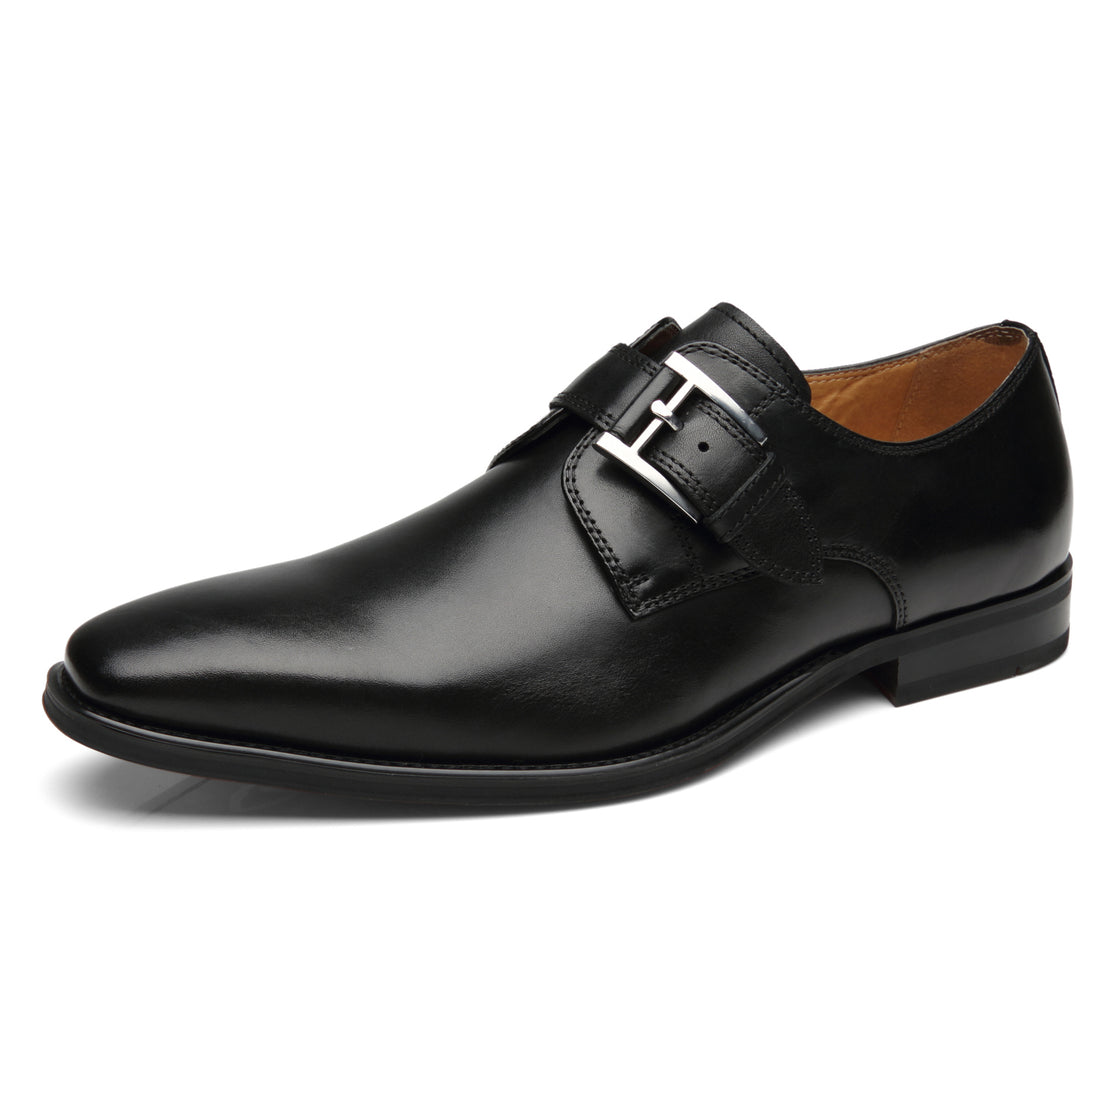 Men's Slip On Loafers Dress Shoes Will-1-black | La Milano Mens Shoes